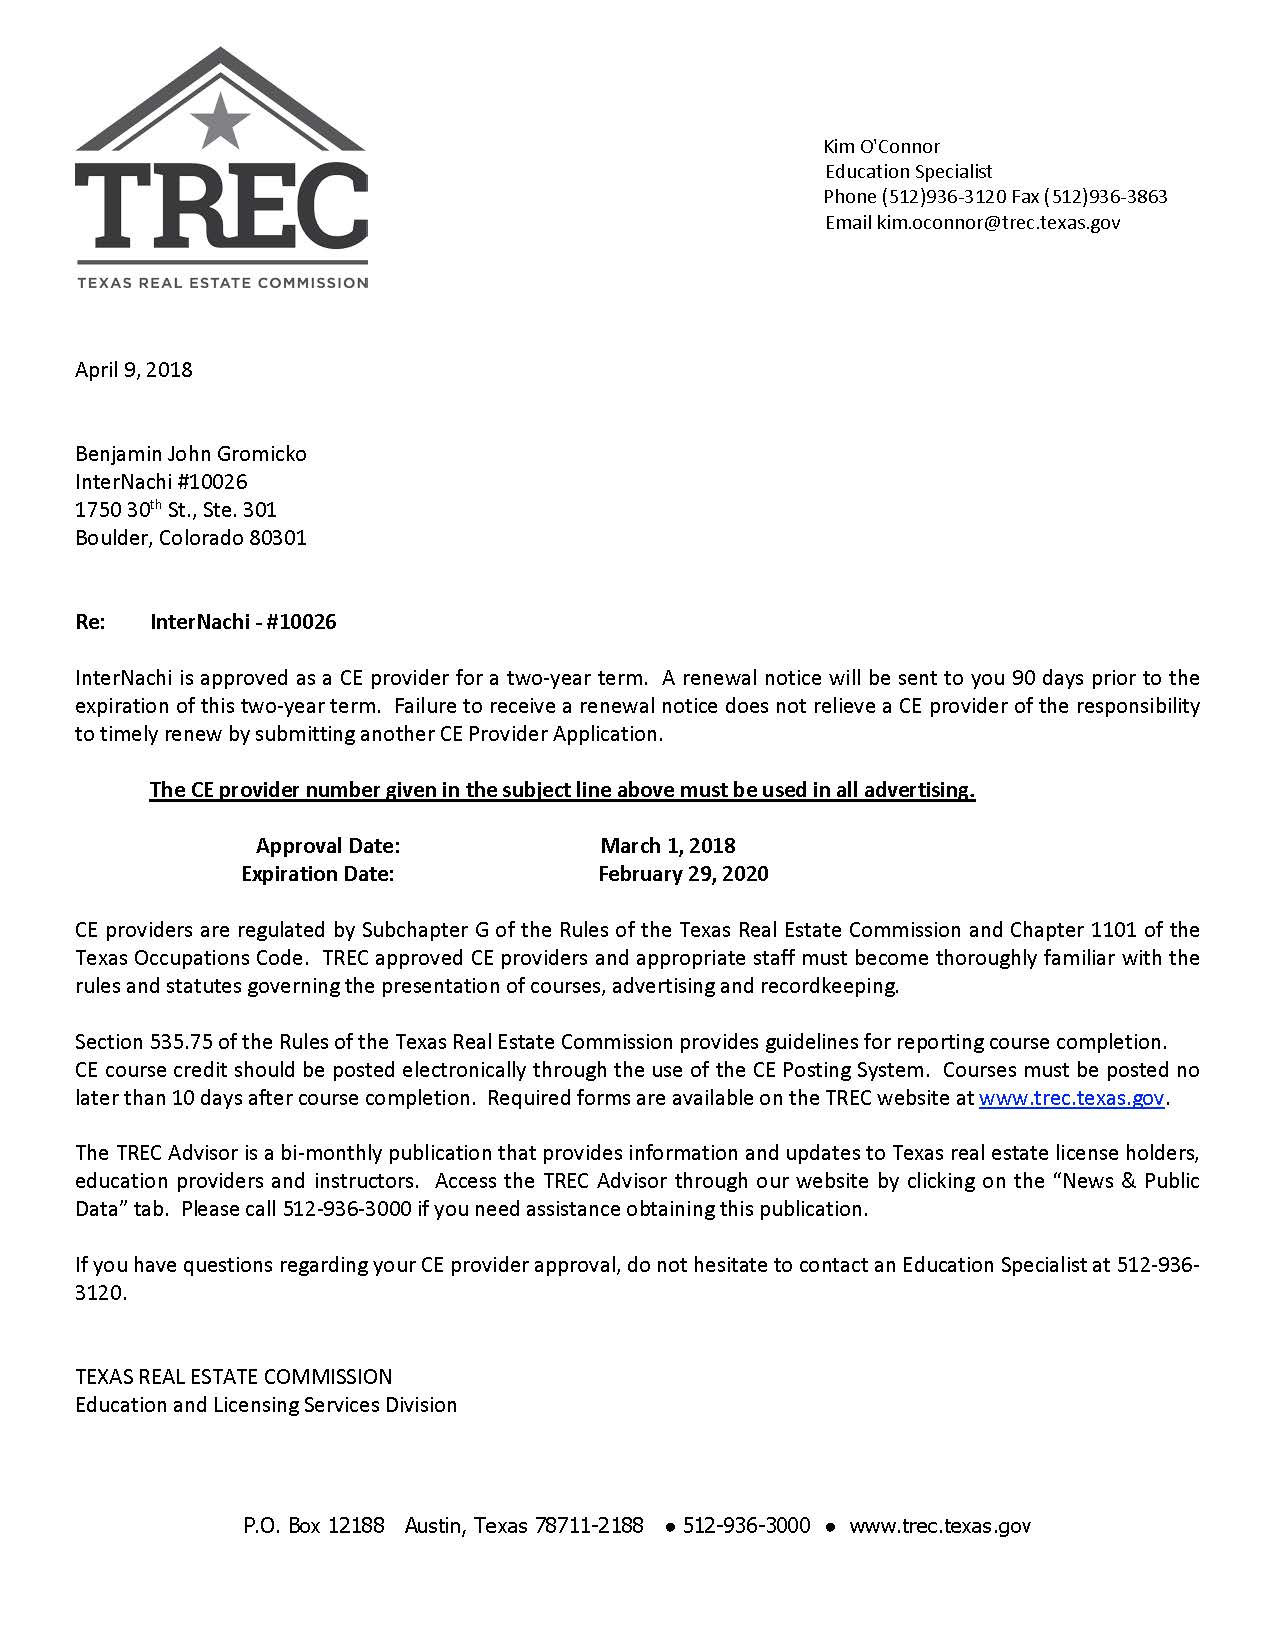 Texas Real Estate Commission (TREC) Approves InterNACHI as ...